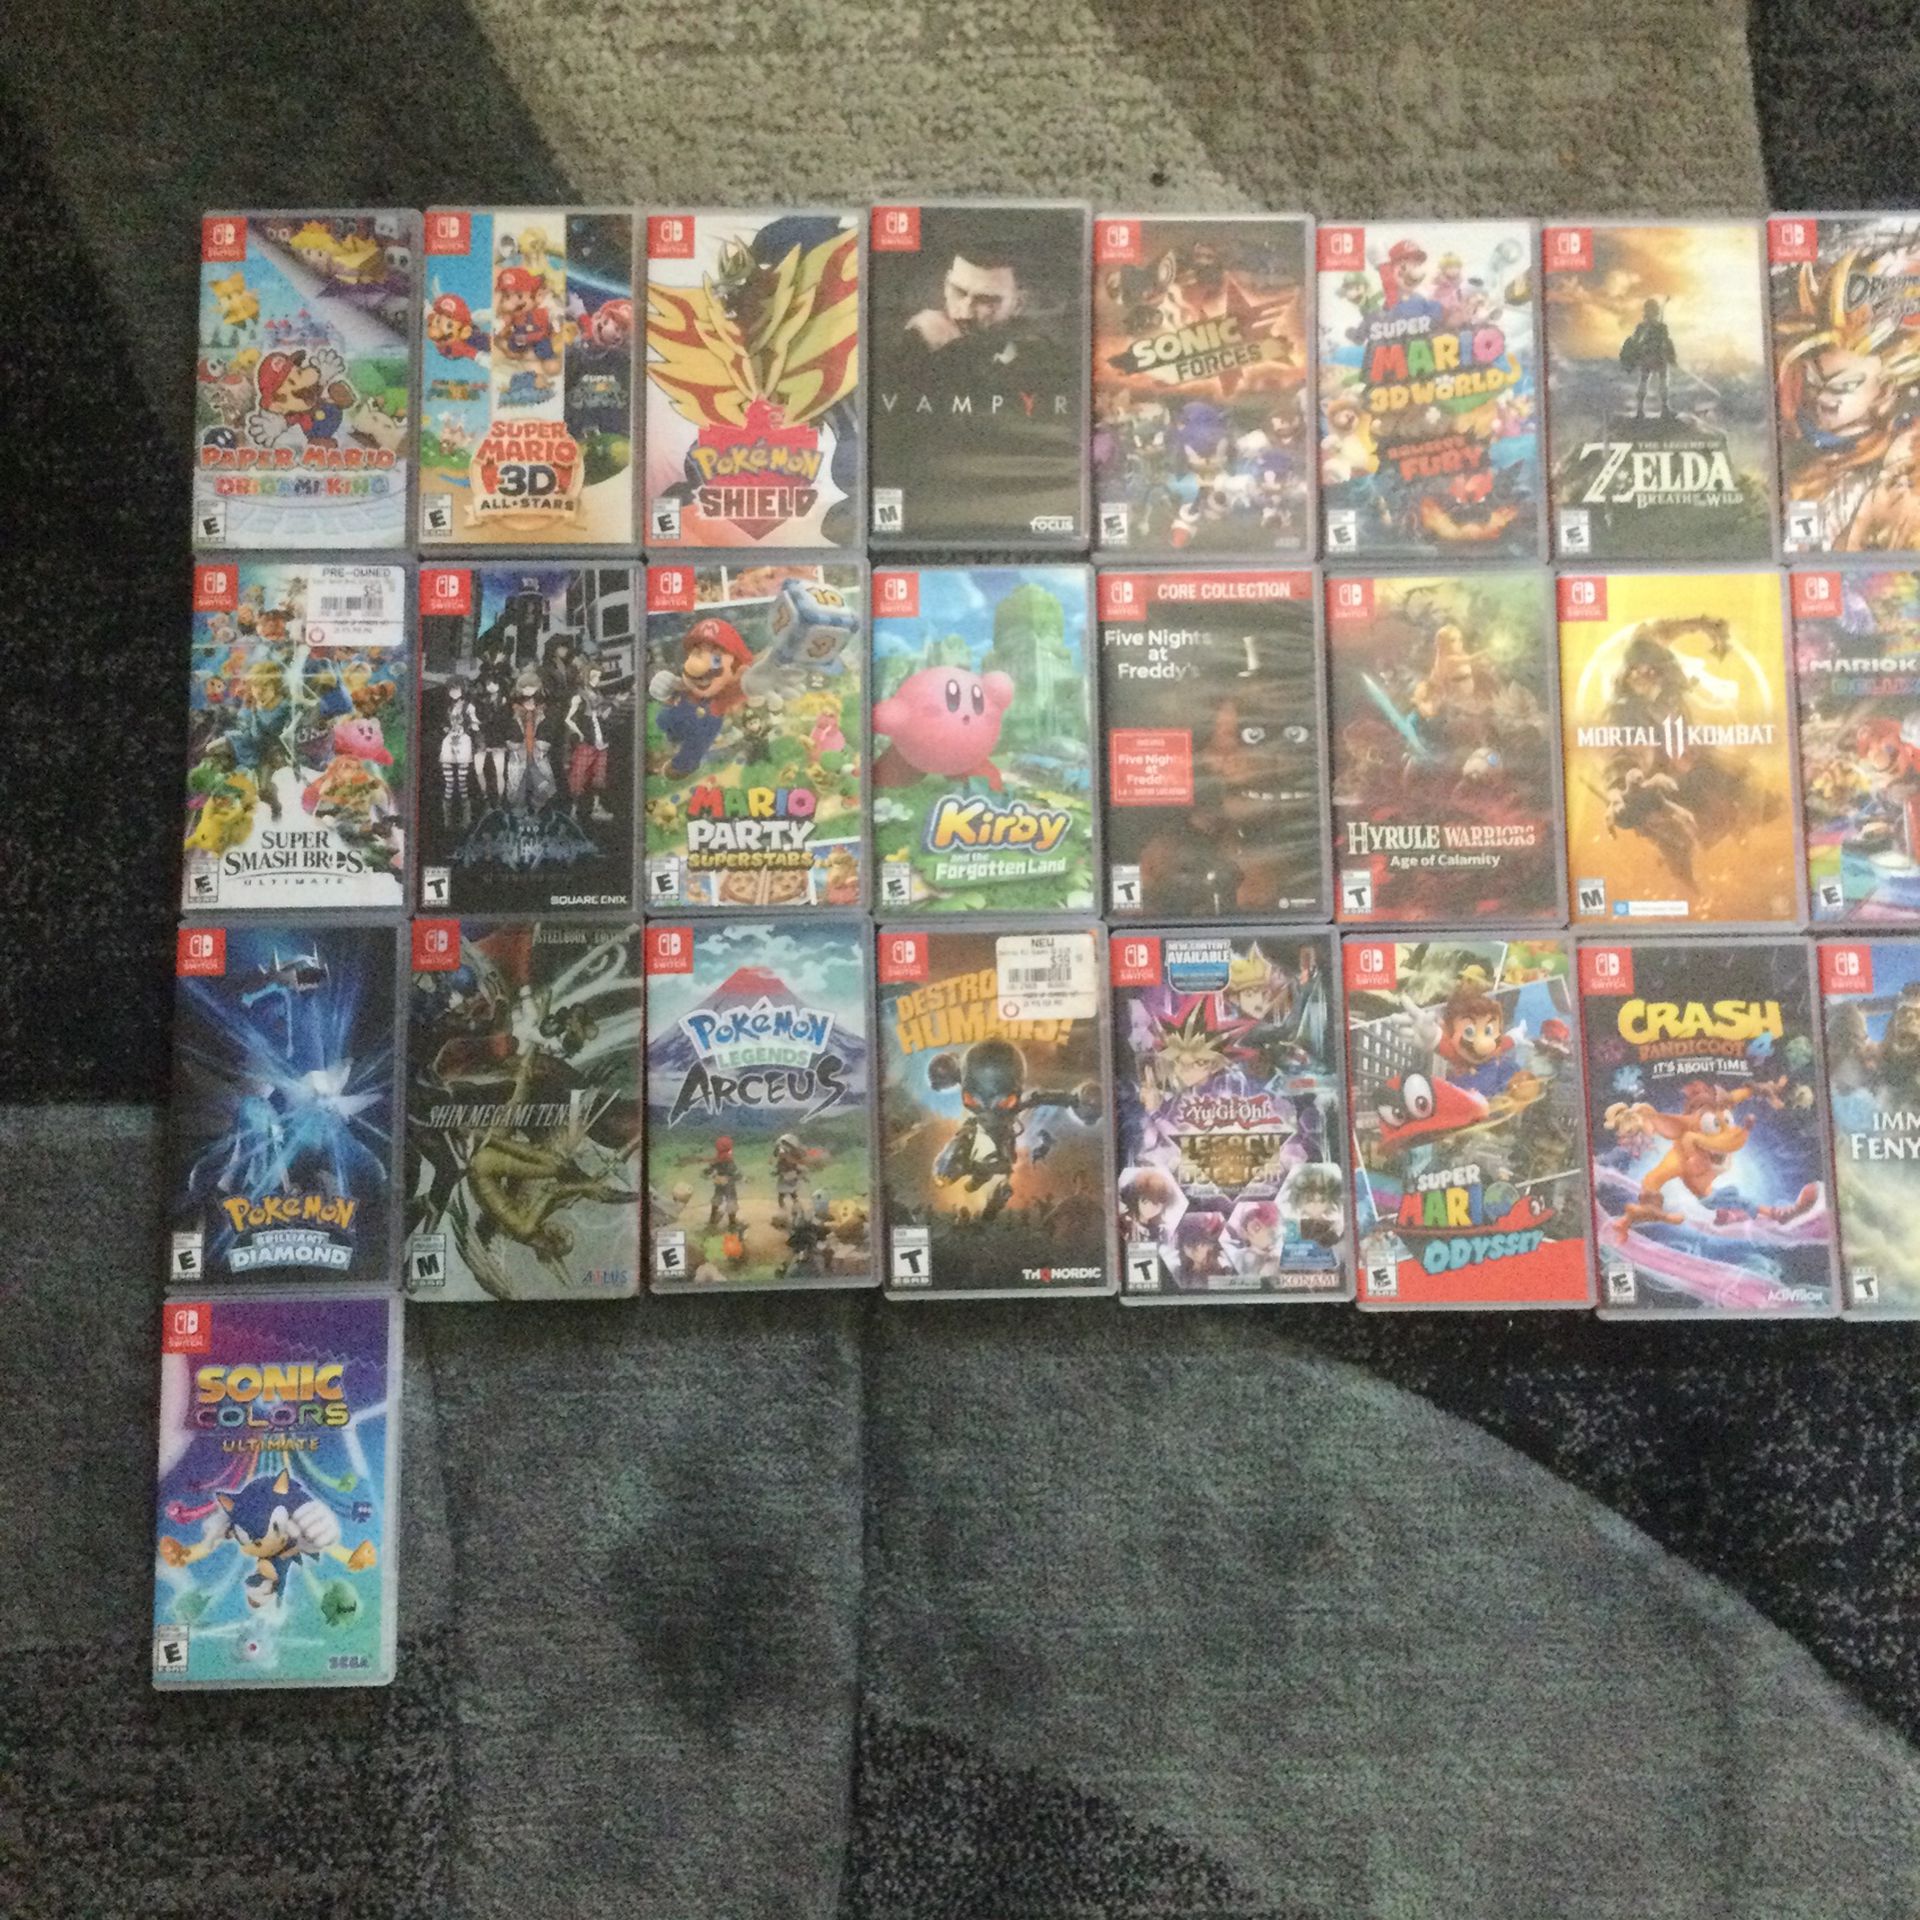 Nintendo Switch games For Sale $15-$20